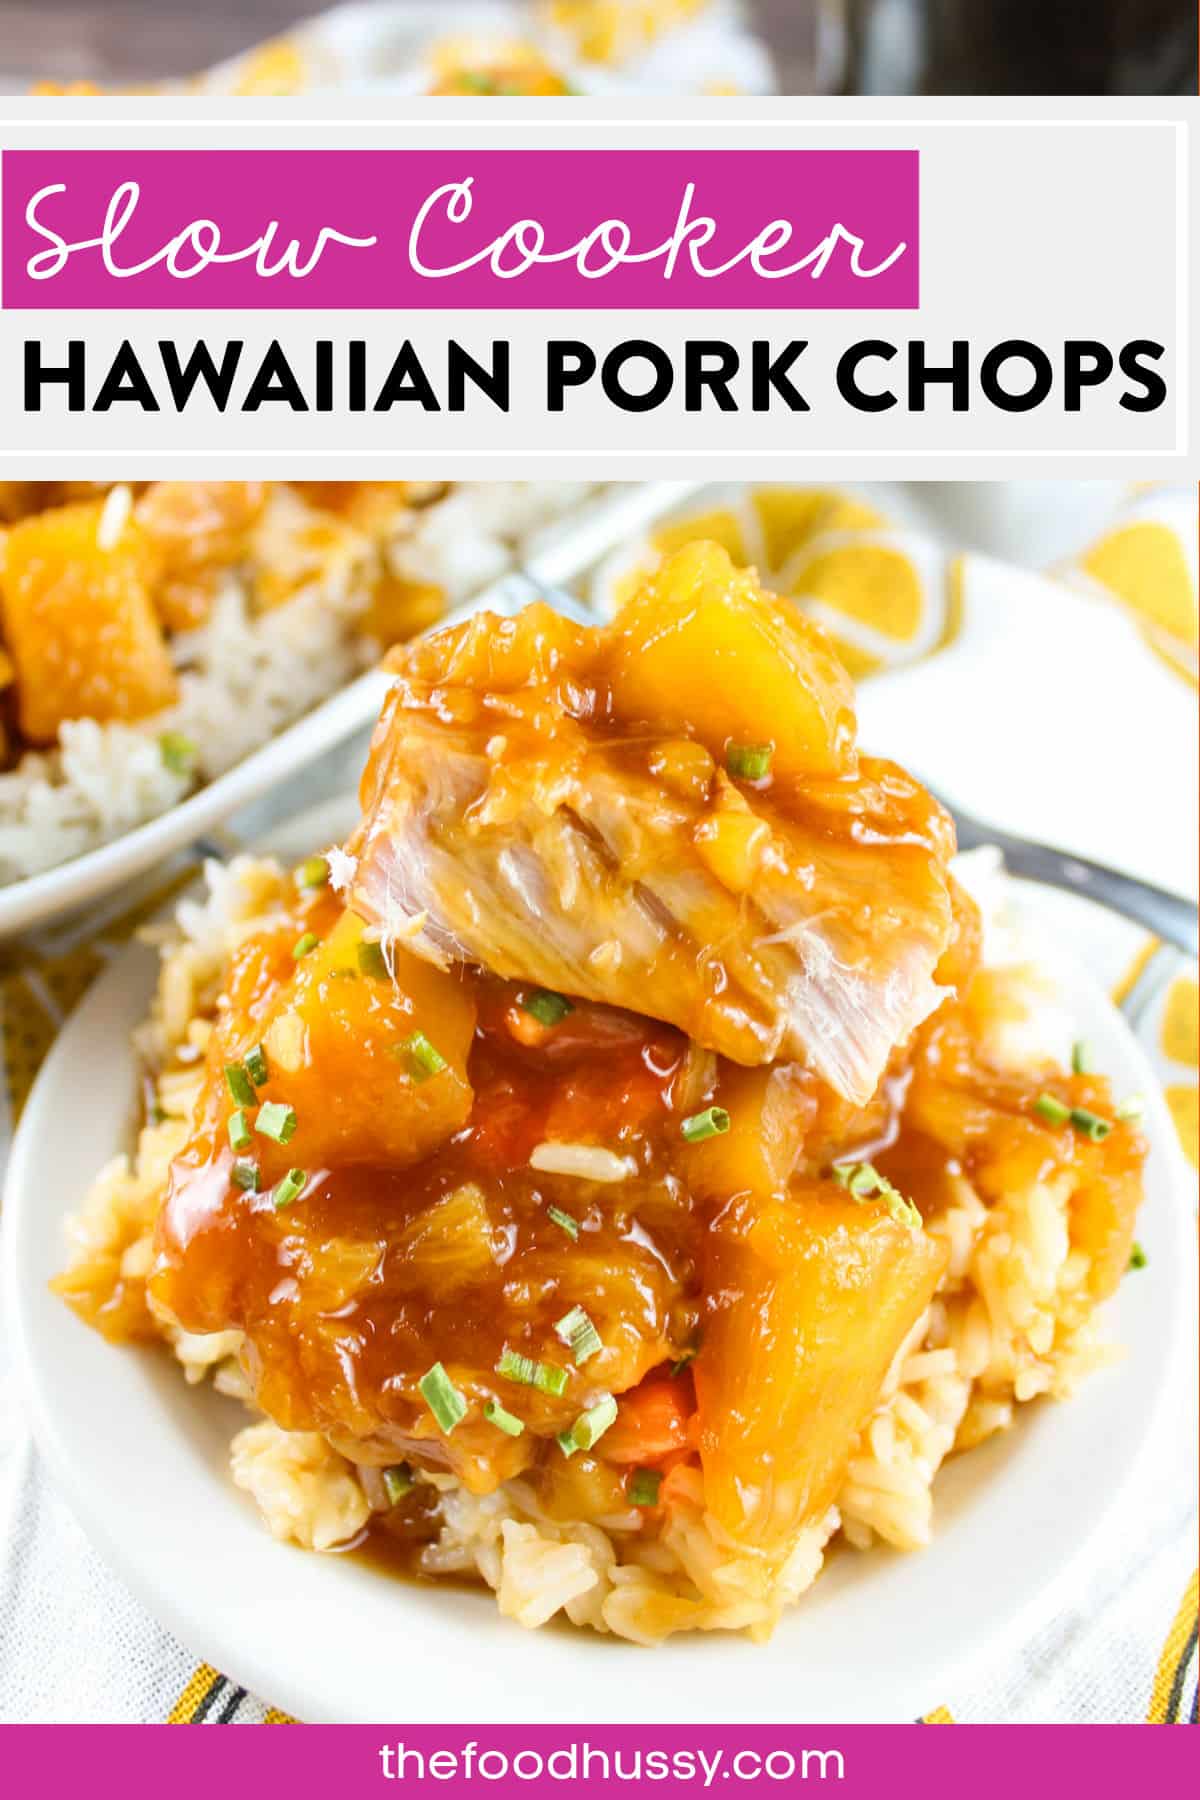 Slow Cooker Hawaiian Pork Chops are a family favorite! Tender boneless pork chops coated in a thick sweet & sour sauce with juicy chunks of pineapple.   via @foodhussy